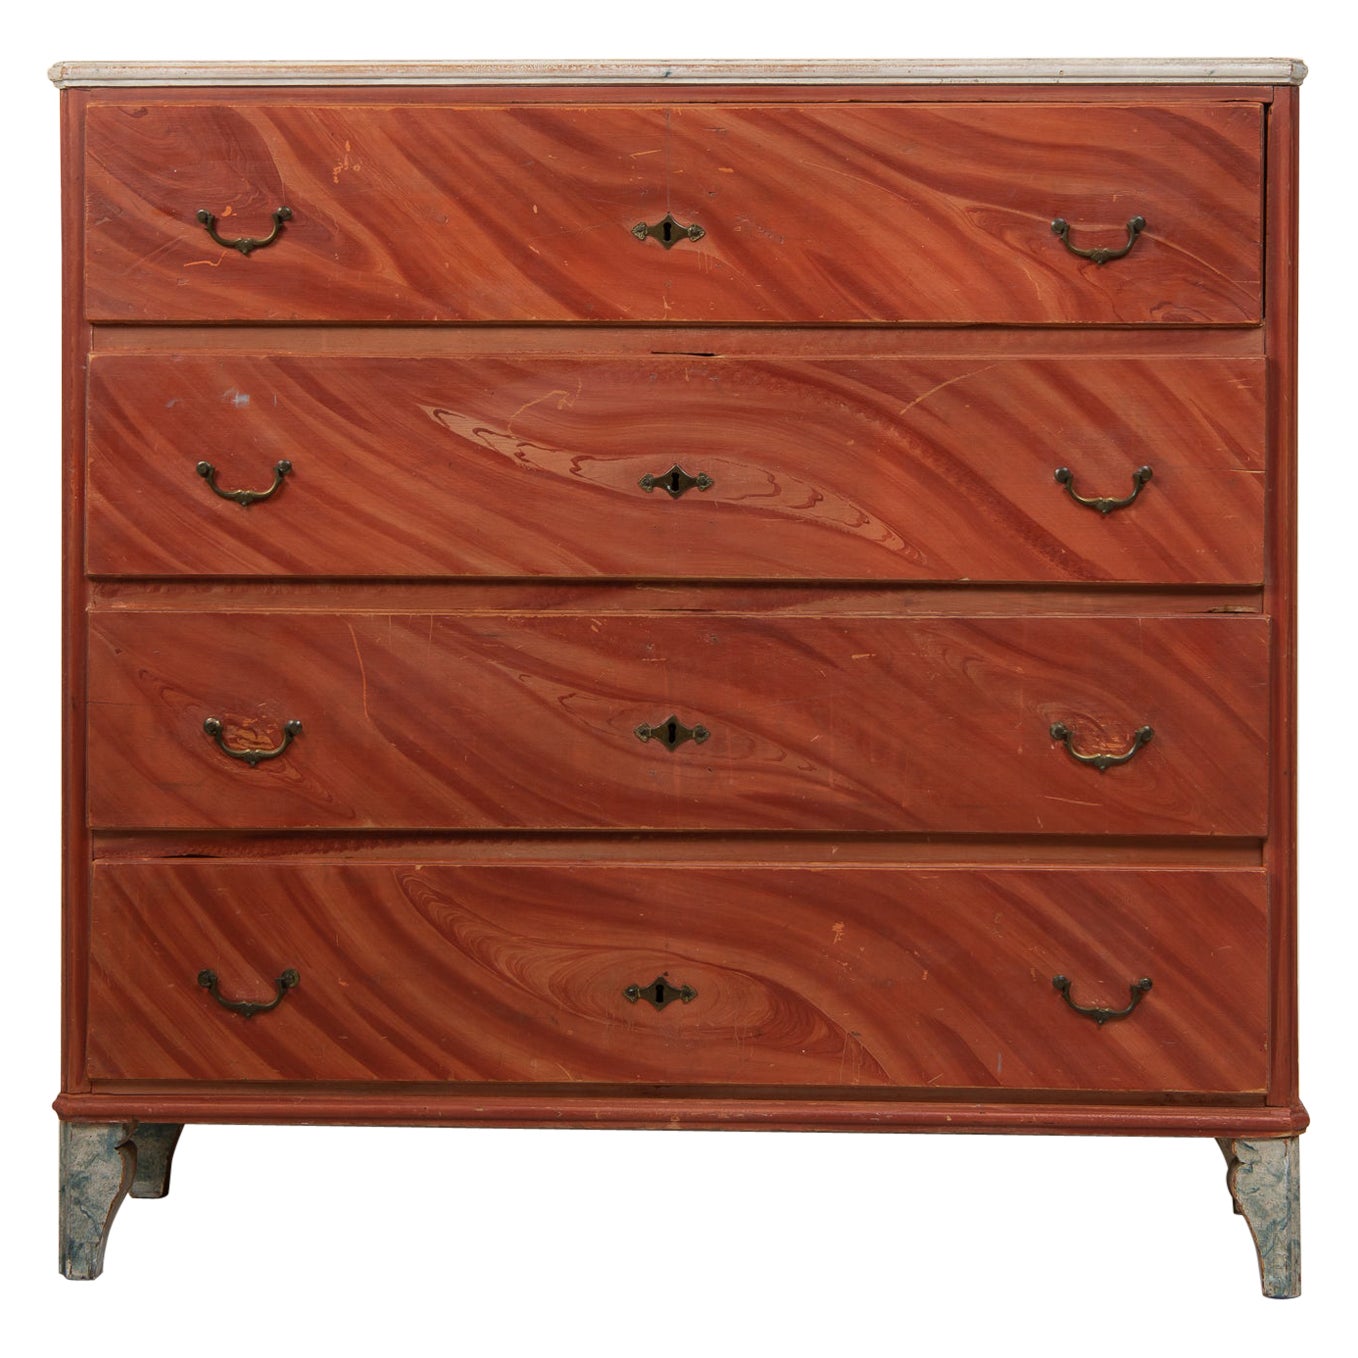 Early 19th Century Swedish Gustavian Country Chest of Drawers